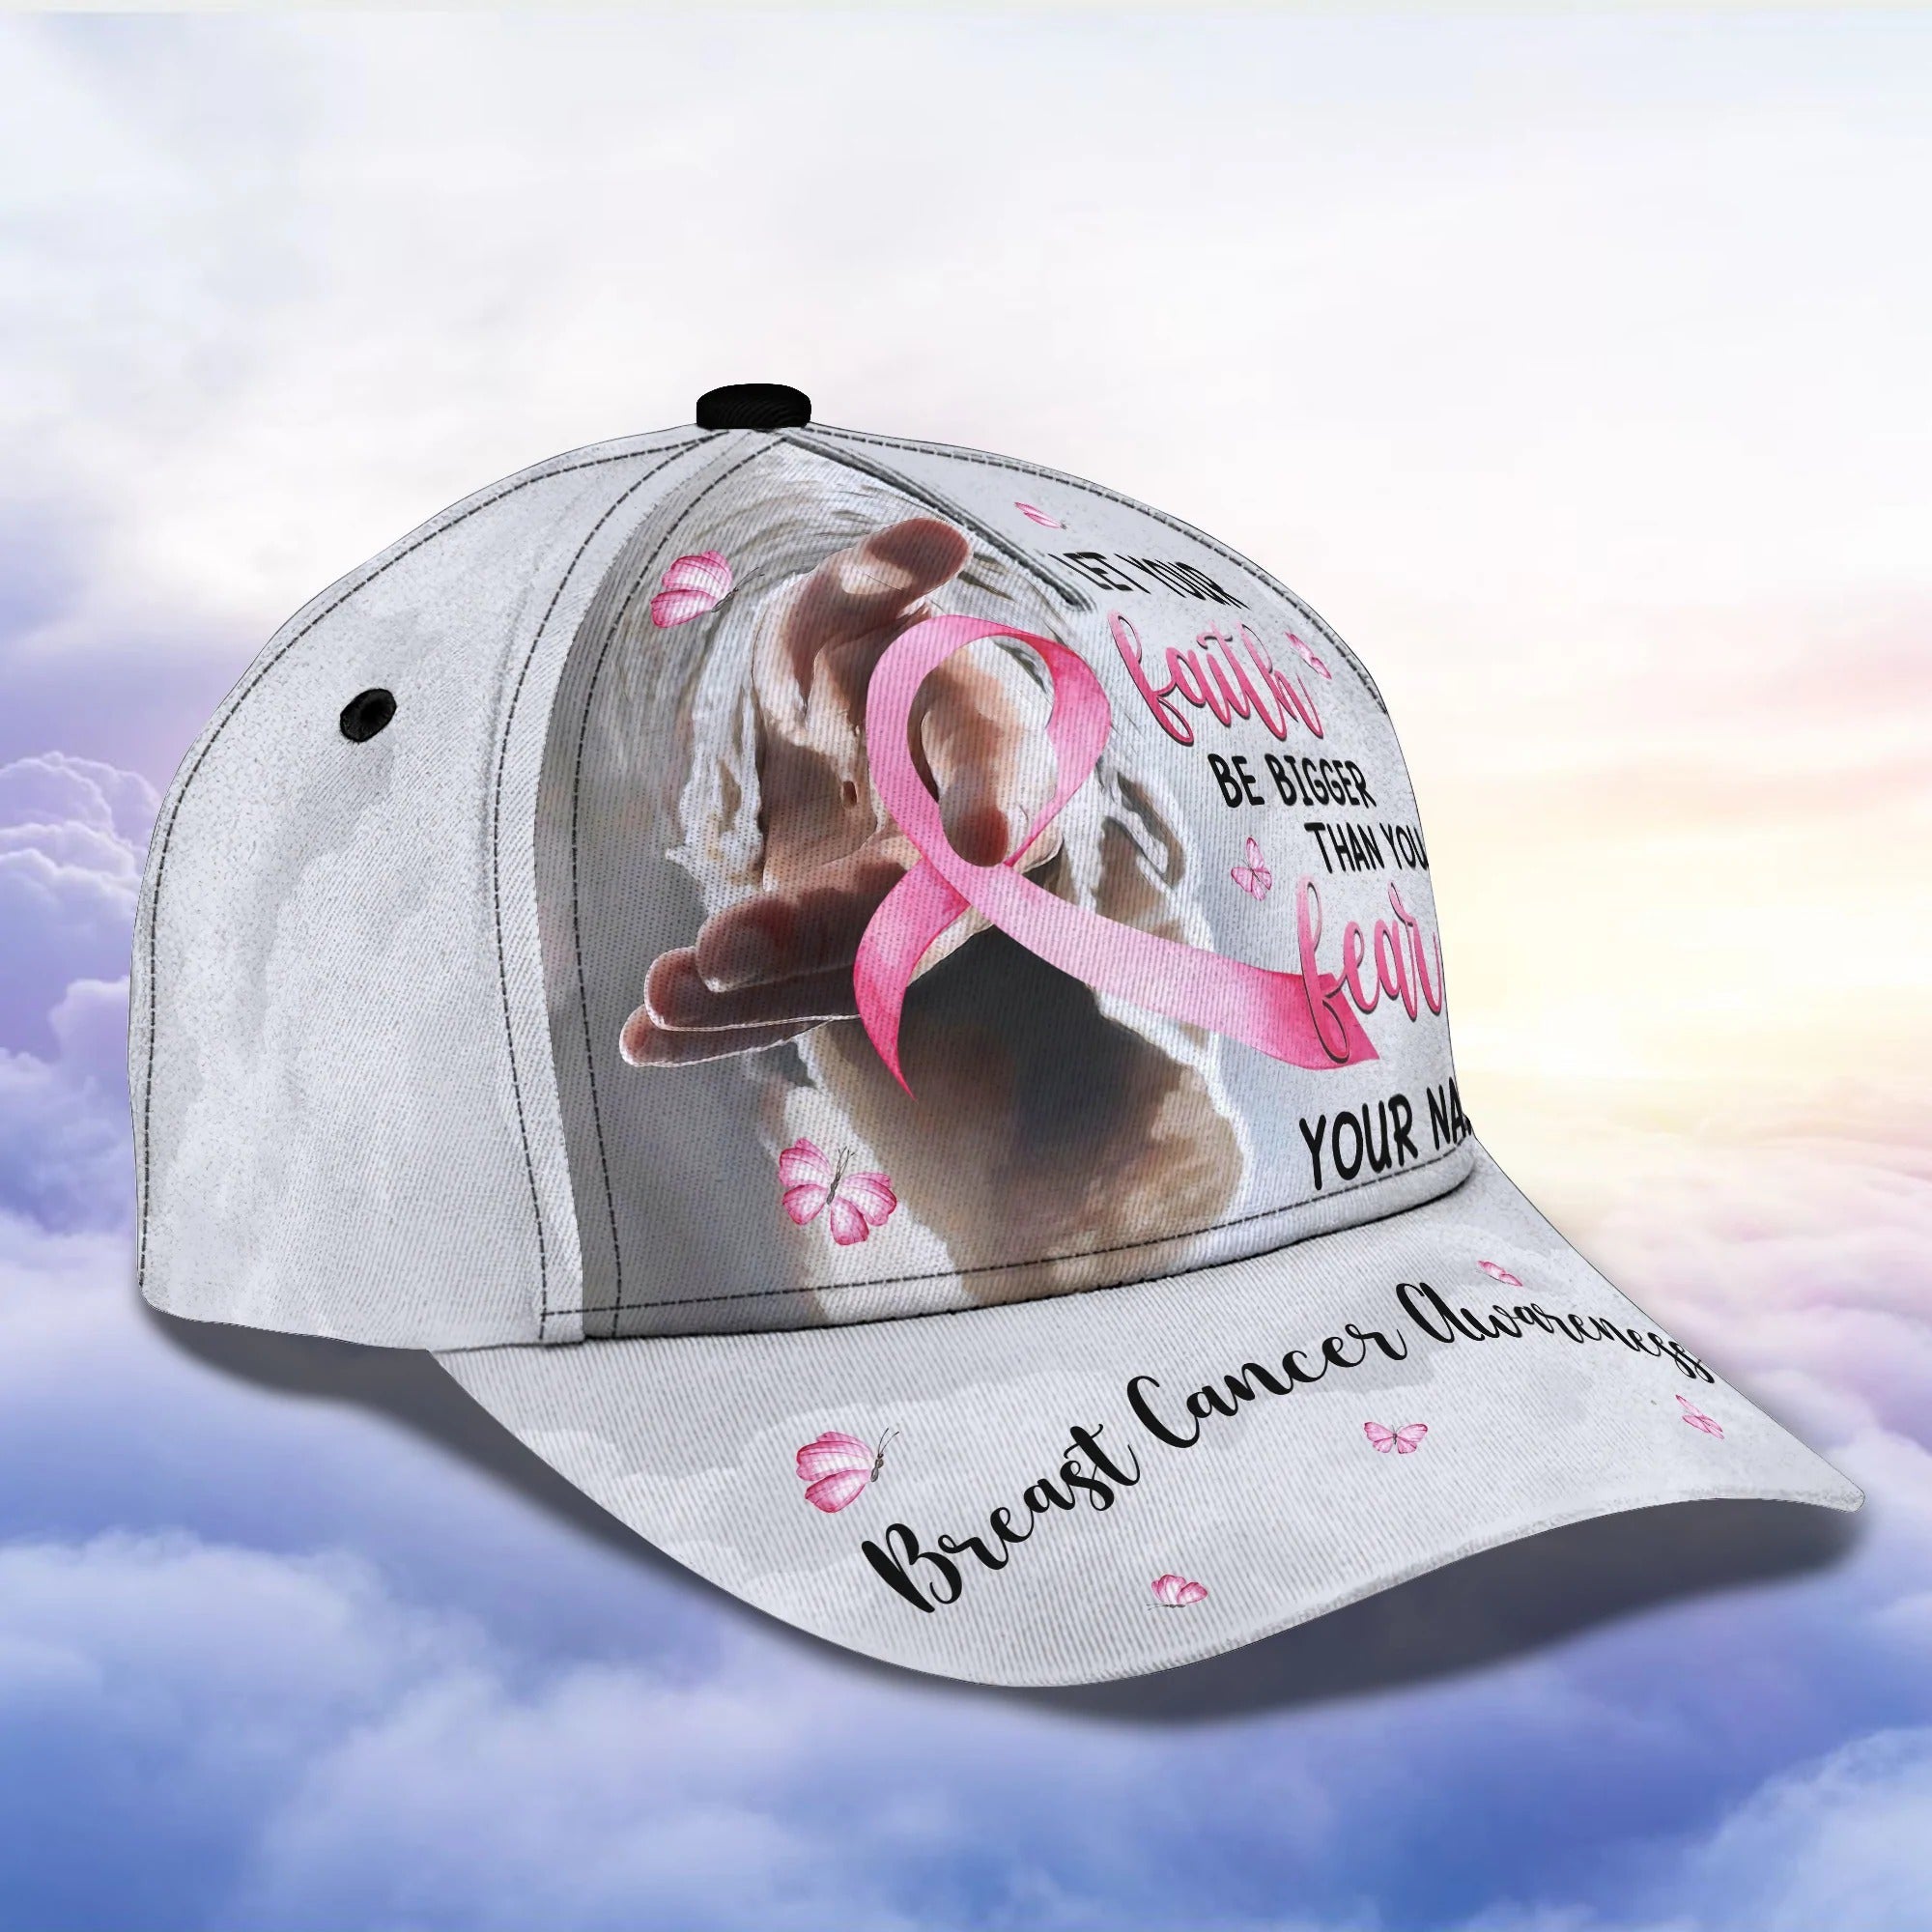 Personalized Breast Cancer Hat/ Pink Cancer Classic Cap Hat/ Breast Cancer Awareness Cap Hat